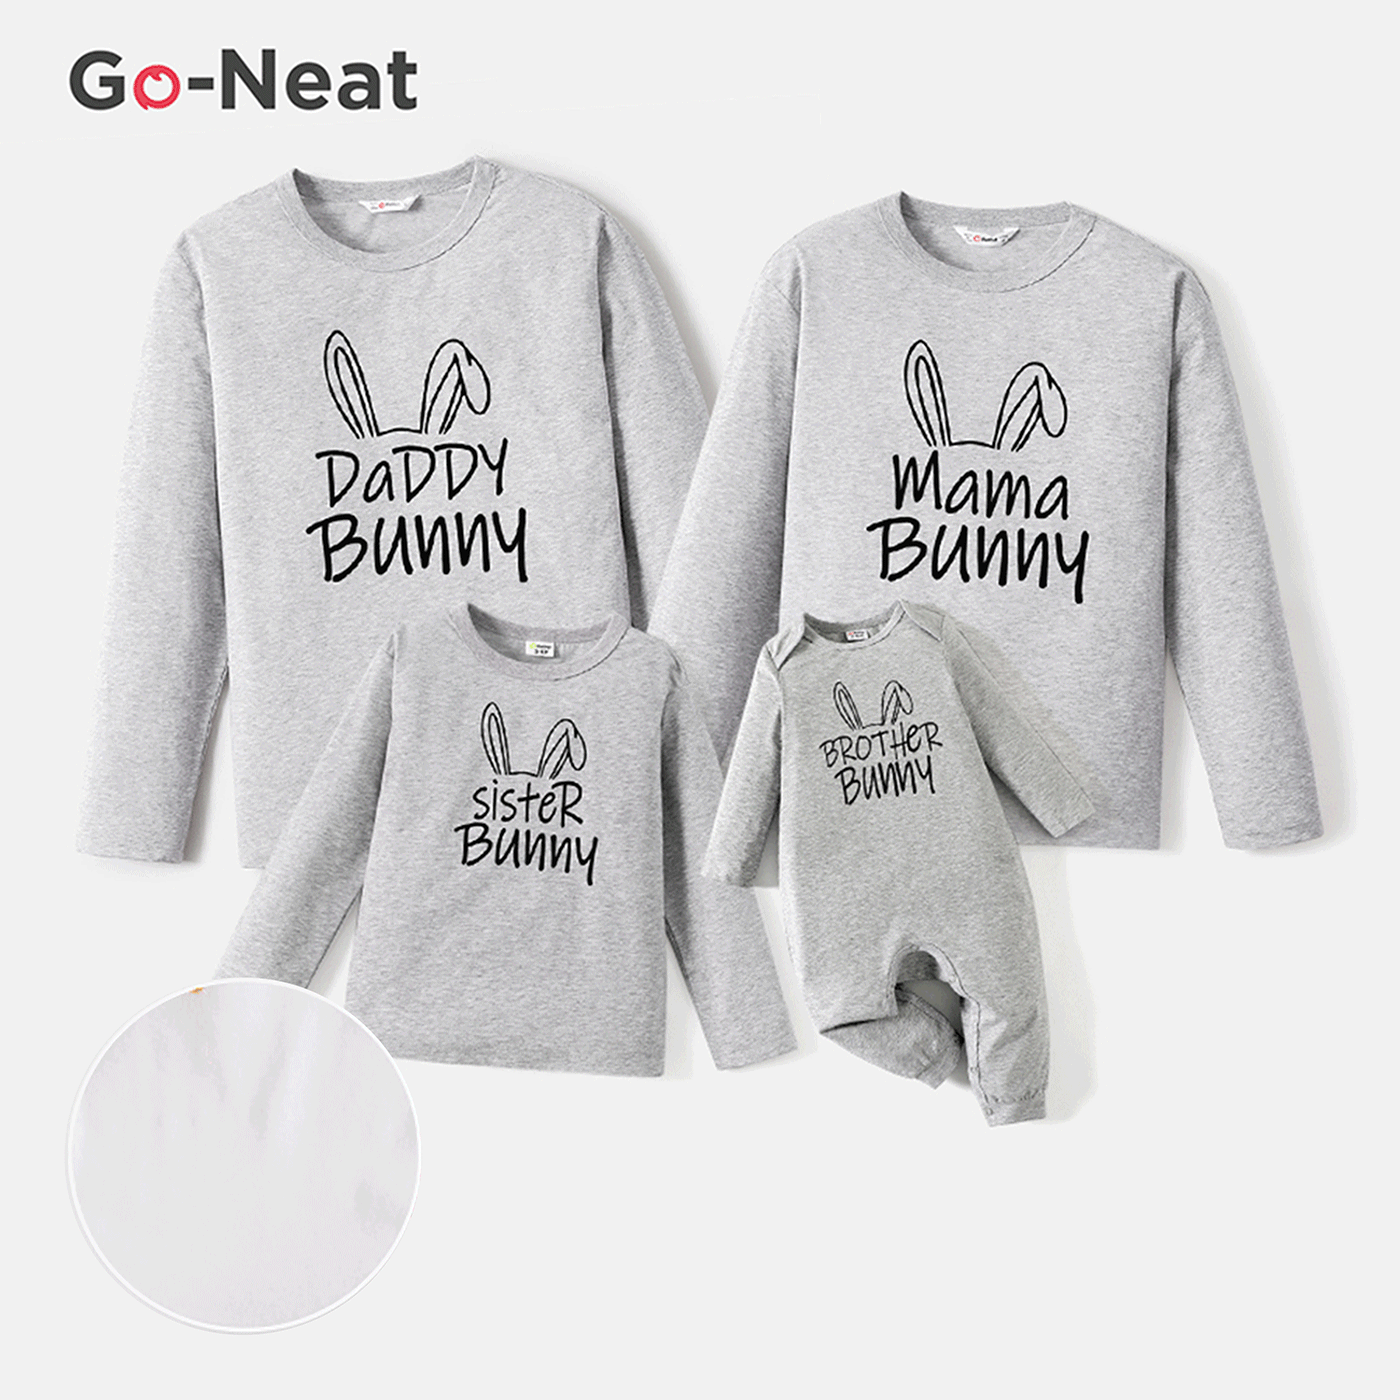 Go-Neat Water Repellent and Stain Resistant Family Matching Rabbit Ears & Letter Print Long-sleeve Tee